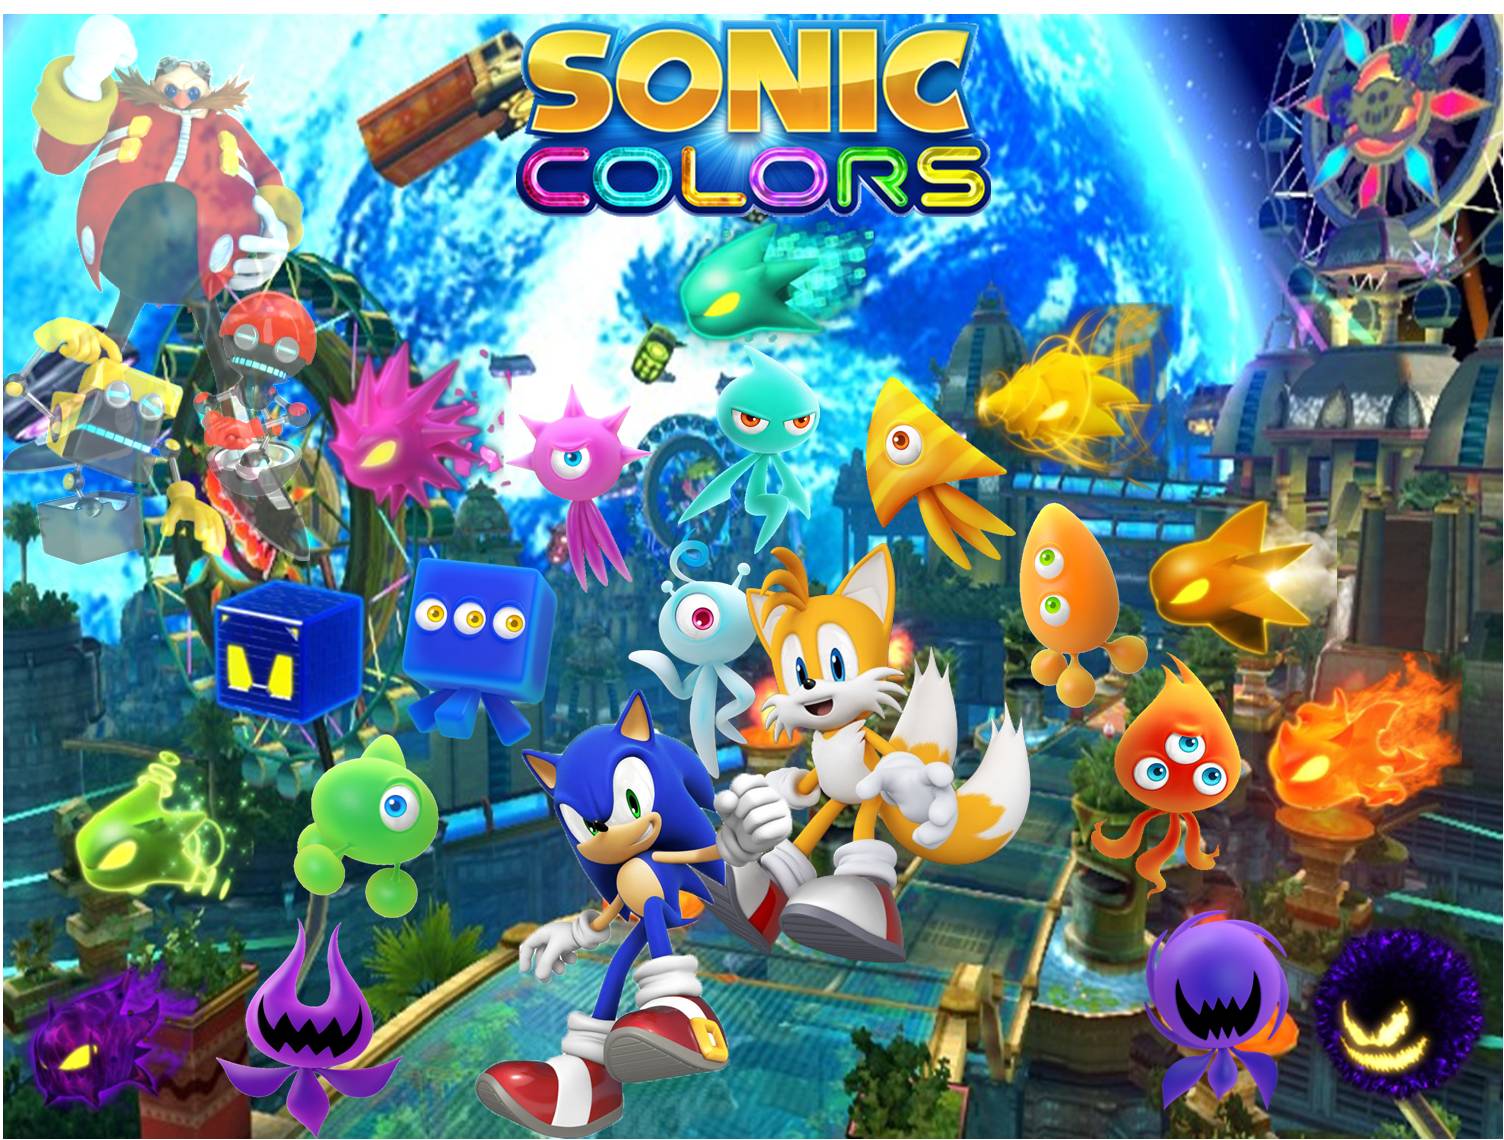 image-my-sonic-colors-jpg-sonic-news-network-the-sonic-wiki